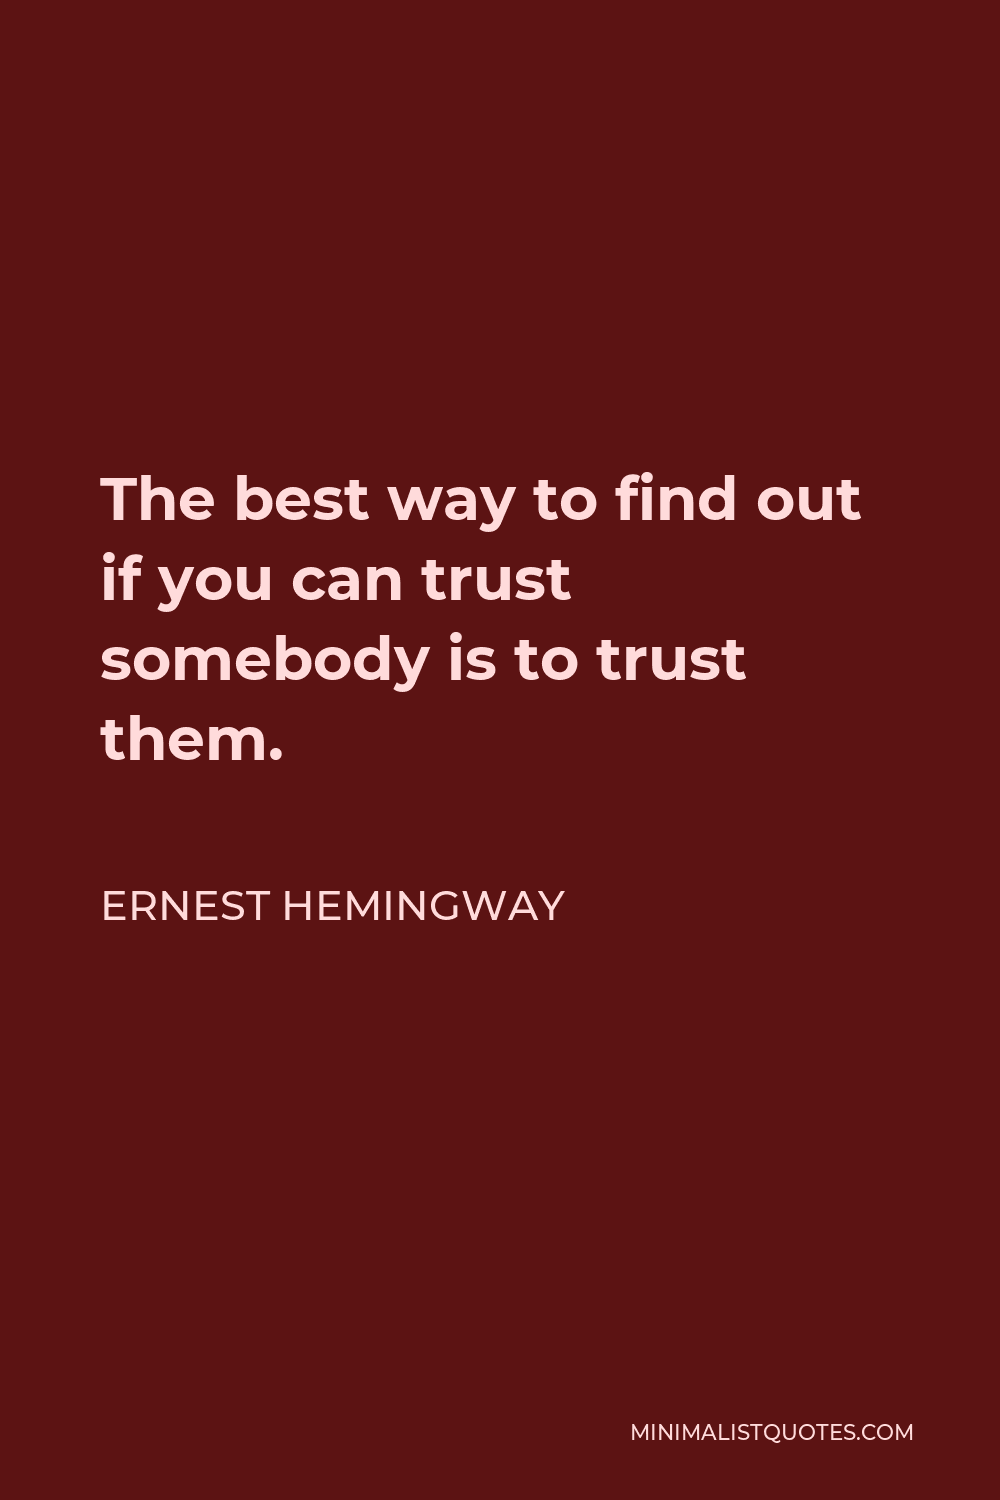 Ernest Hemingway Quote - The best way to find out if you can trust somebody is to trust them.